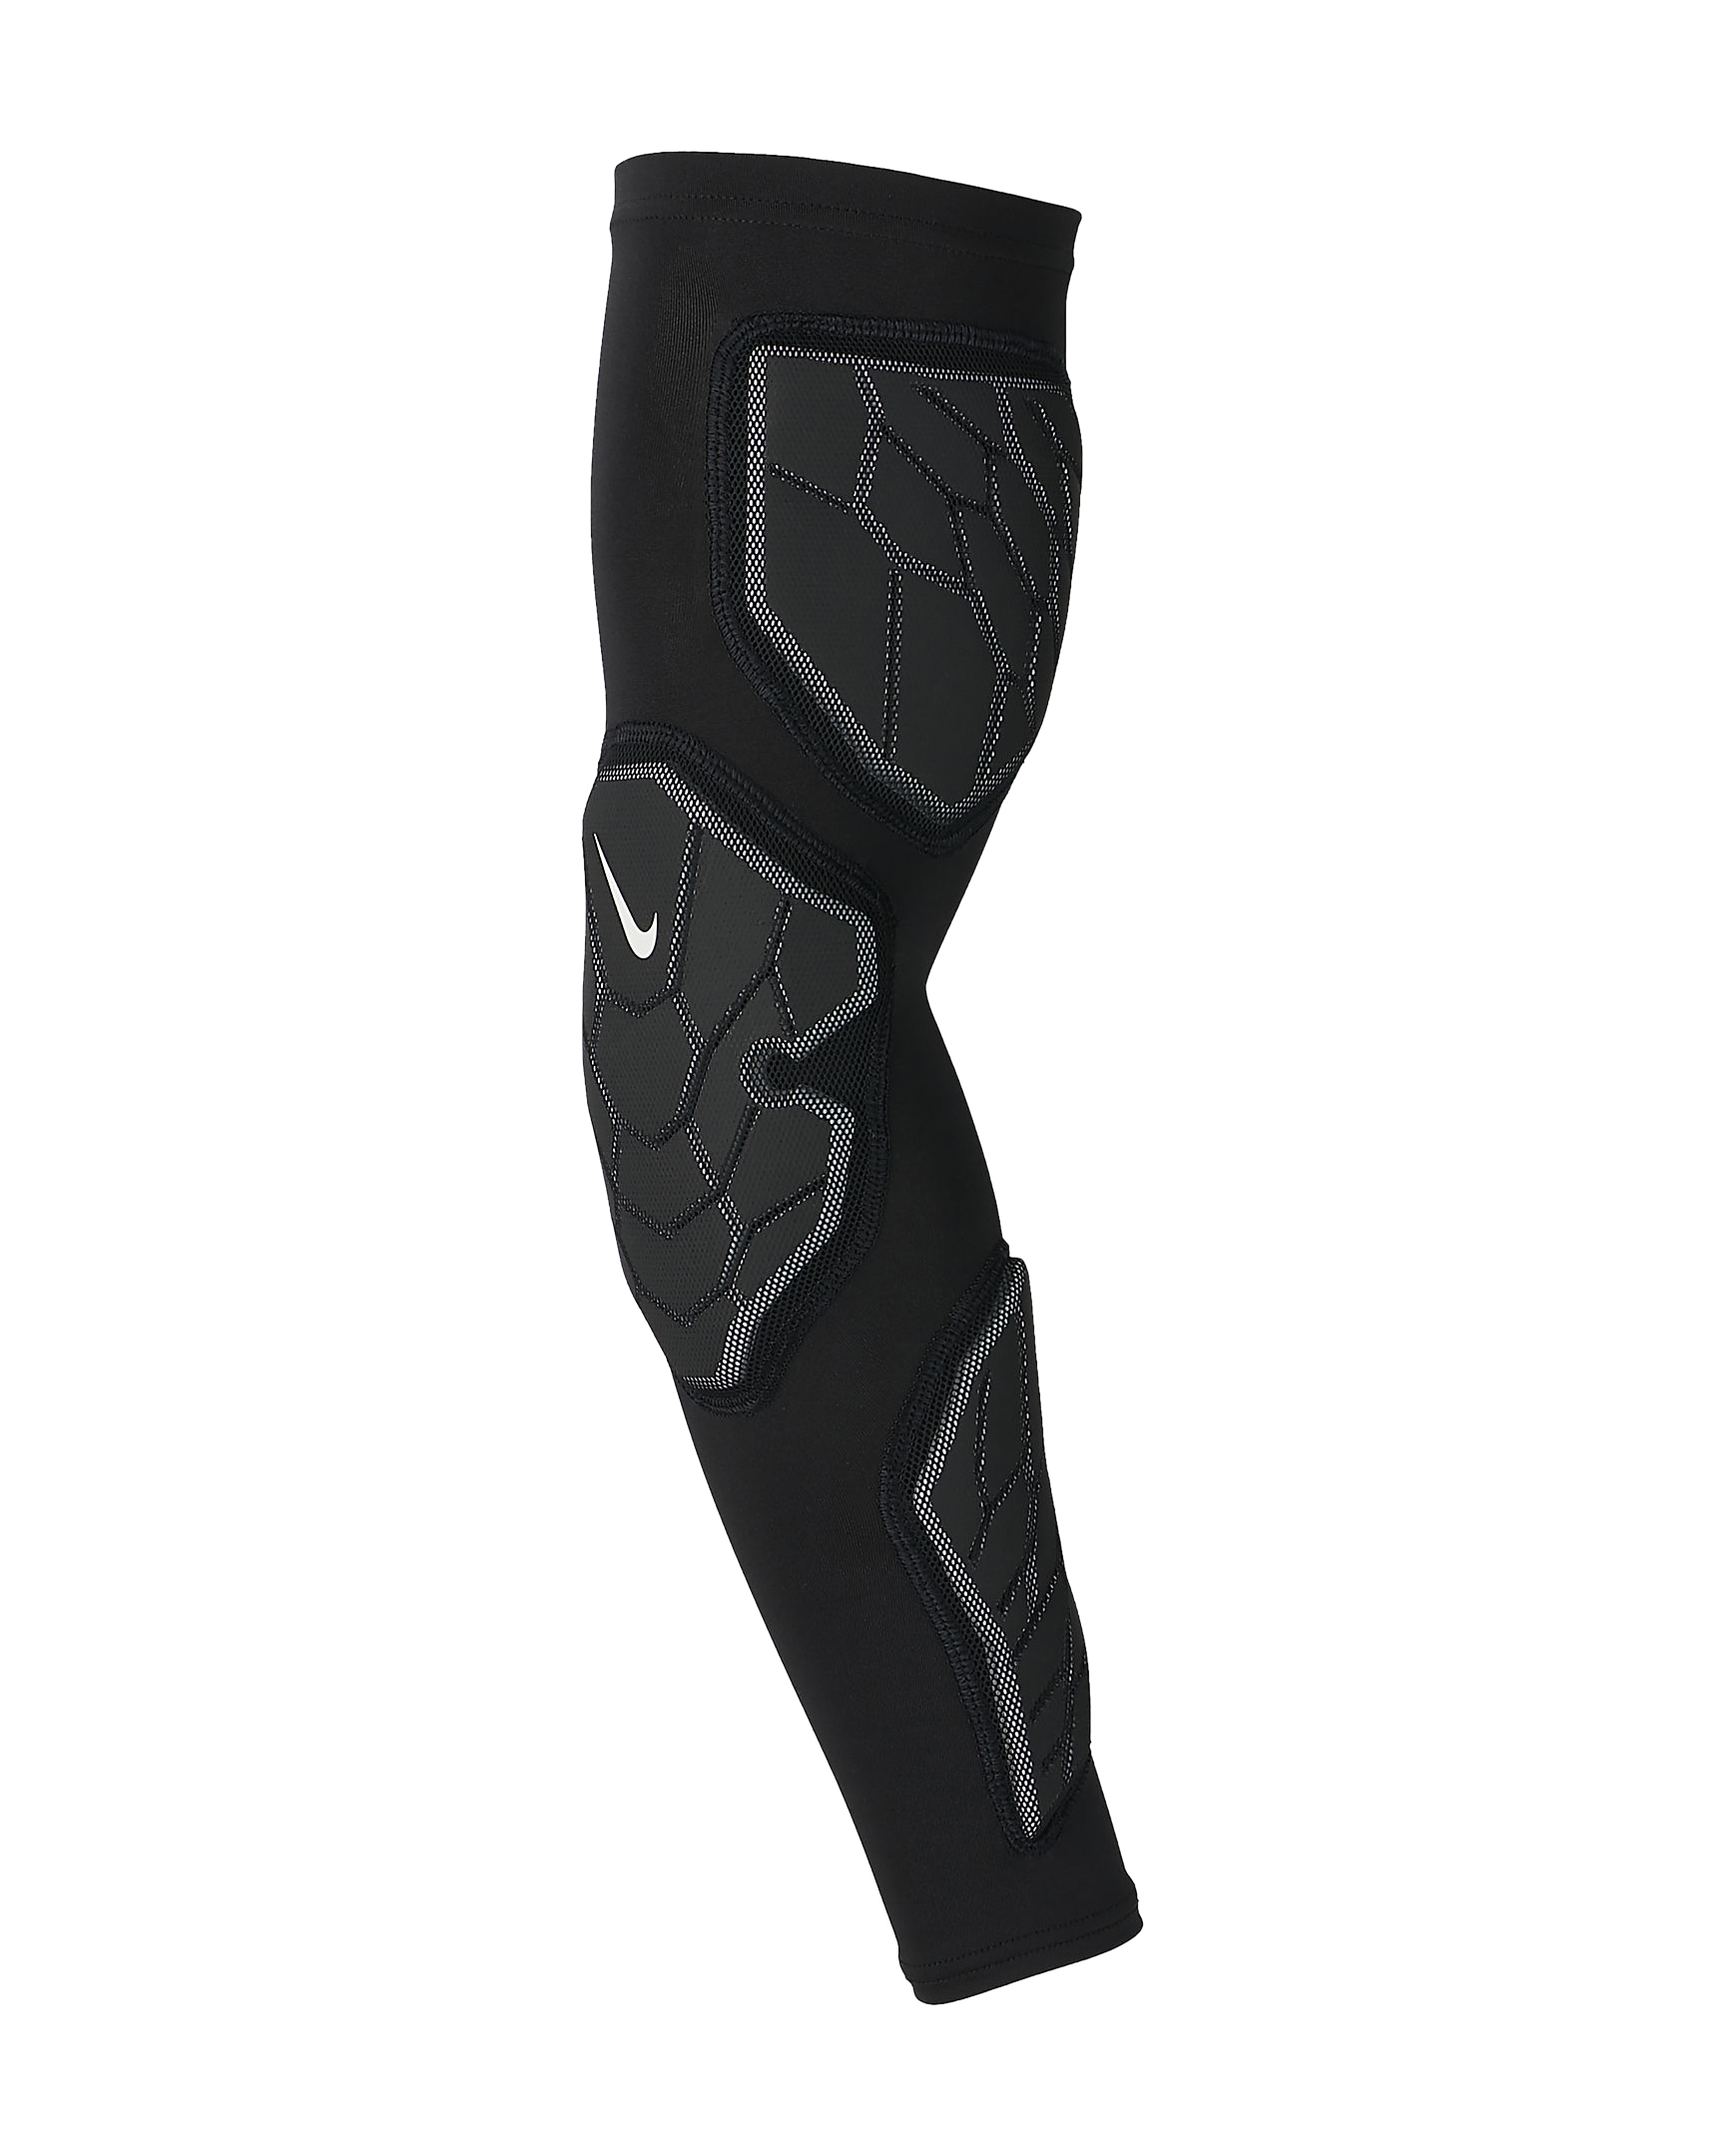 nike pro hyperstrong padded arm sleeve